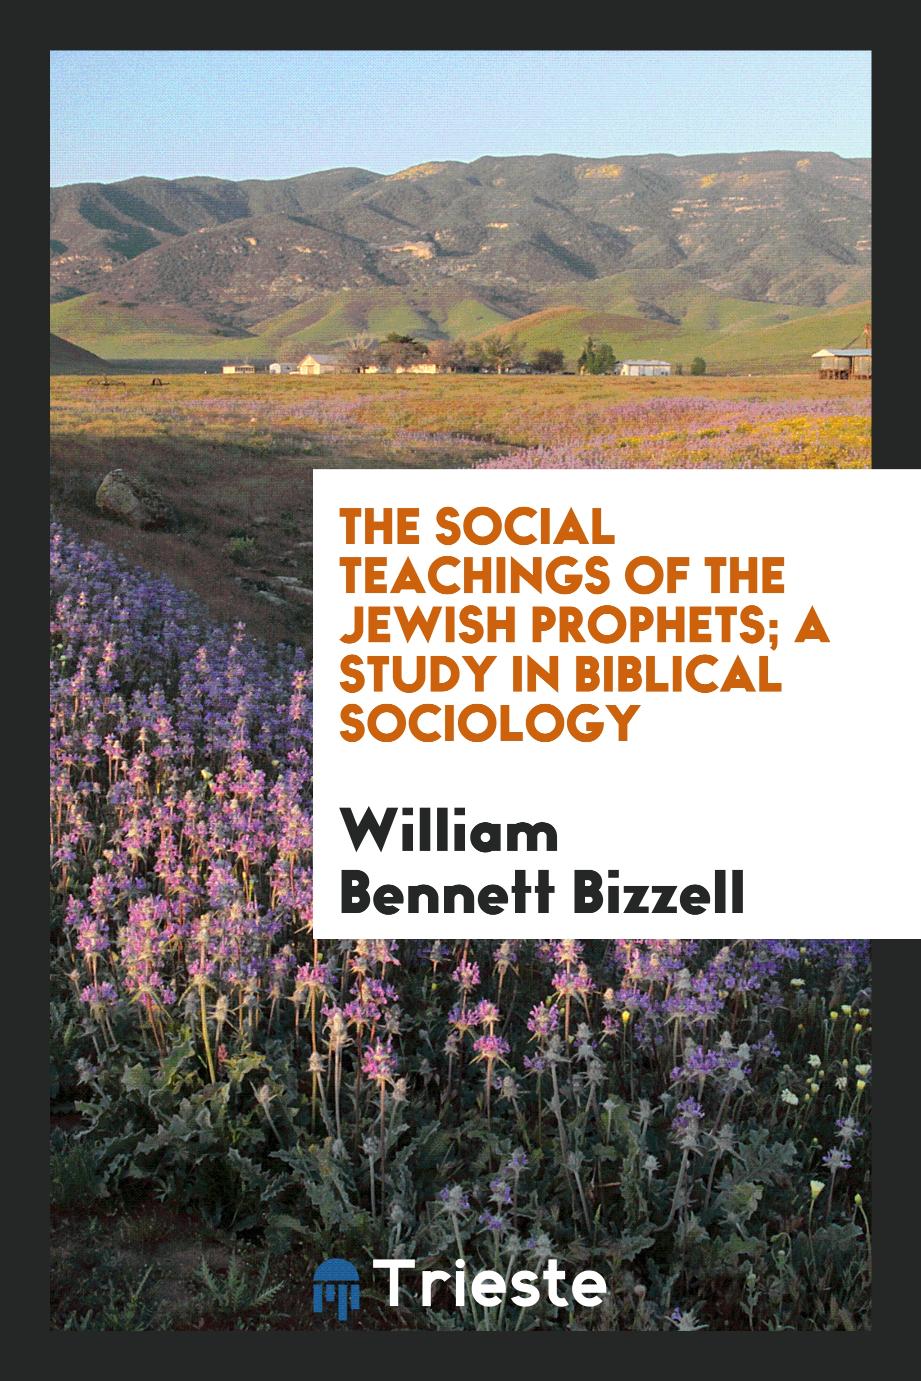 The social teachings of the Jewish prophets; a study in Biblical sociology